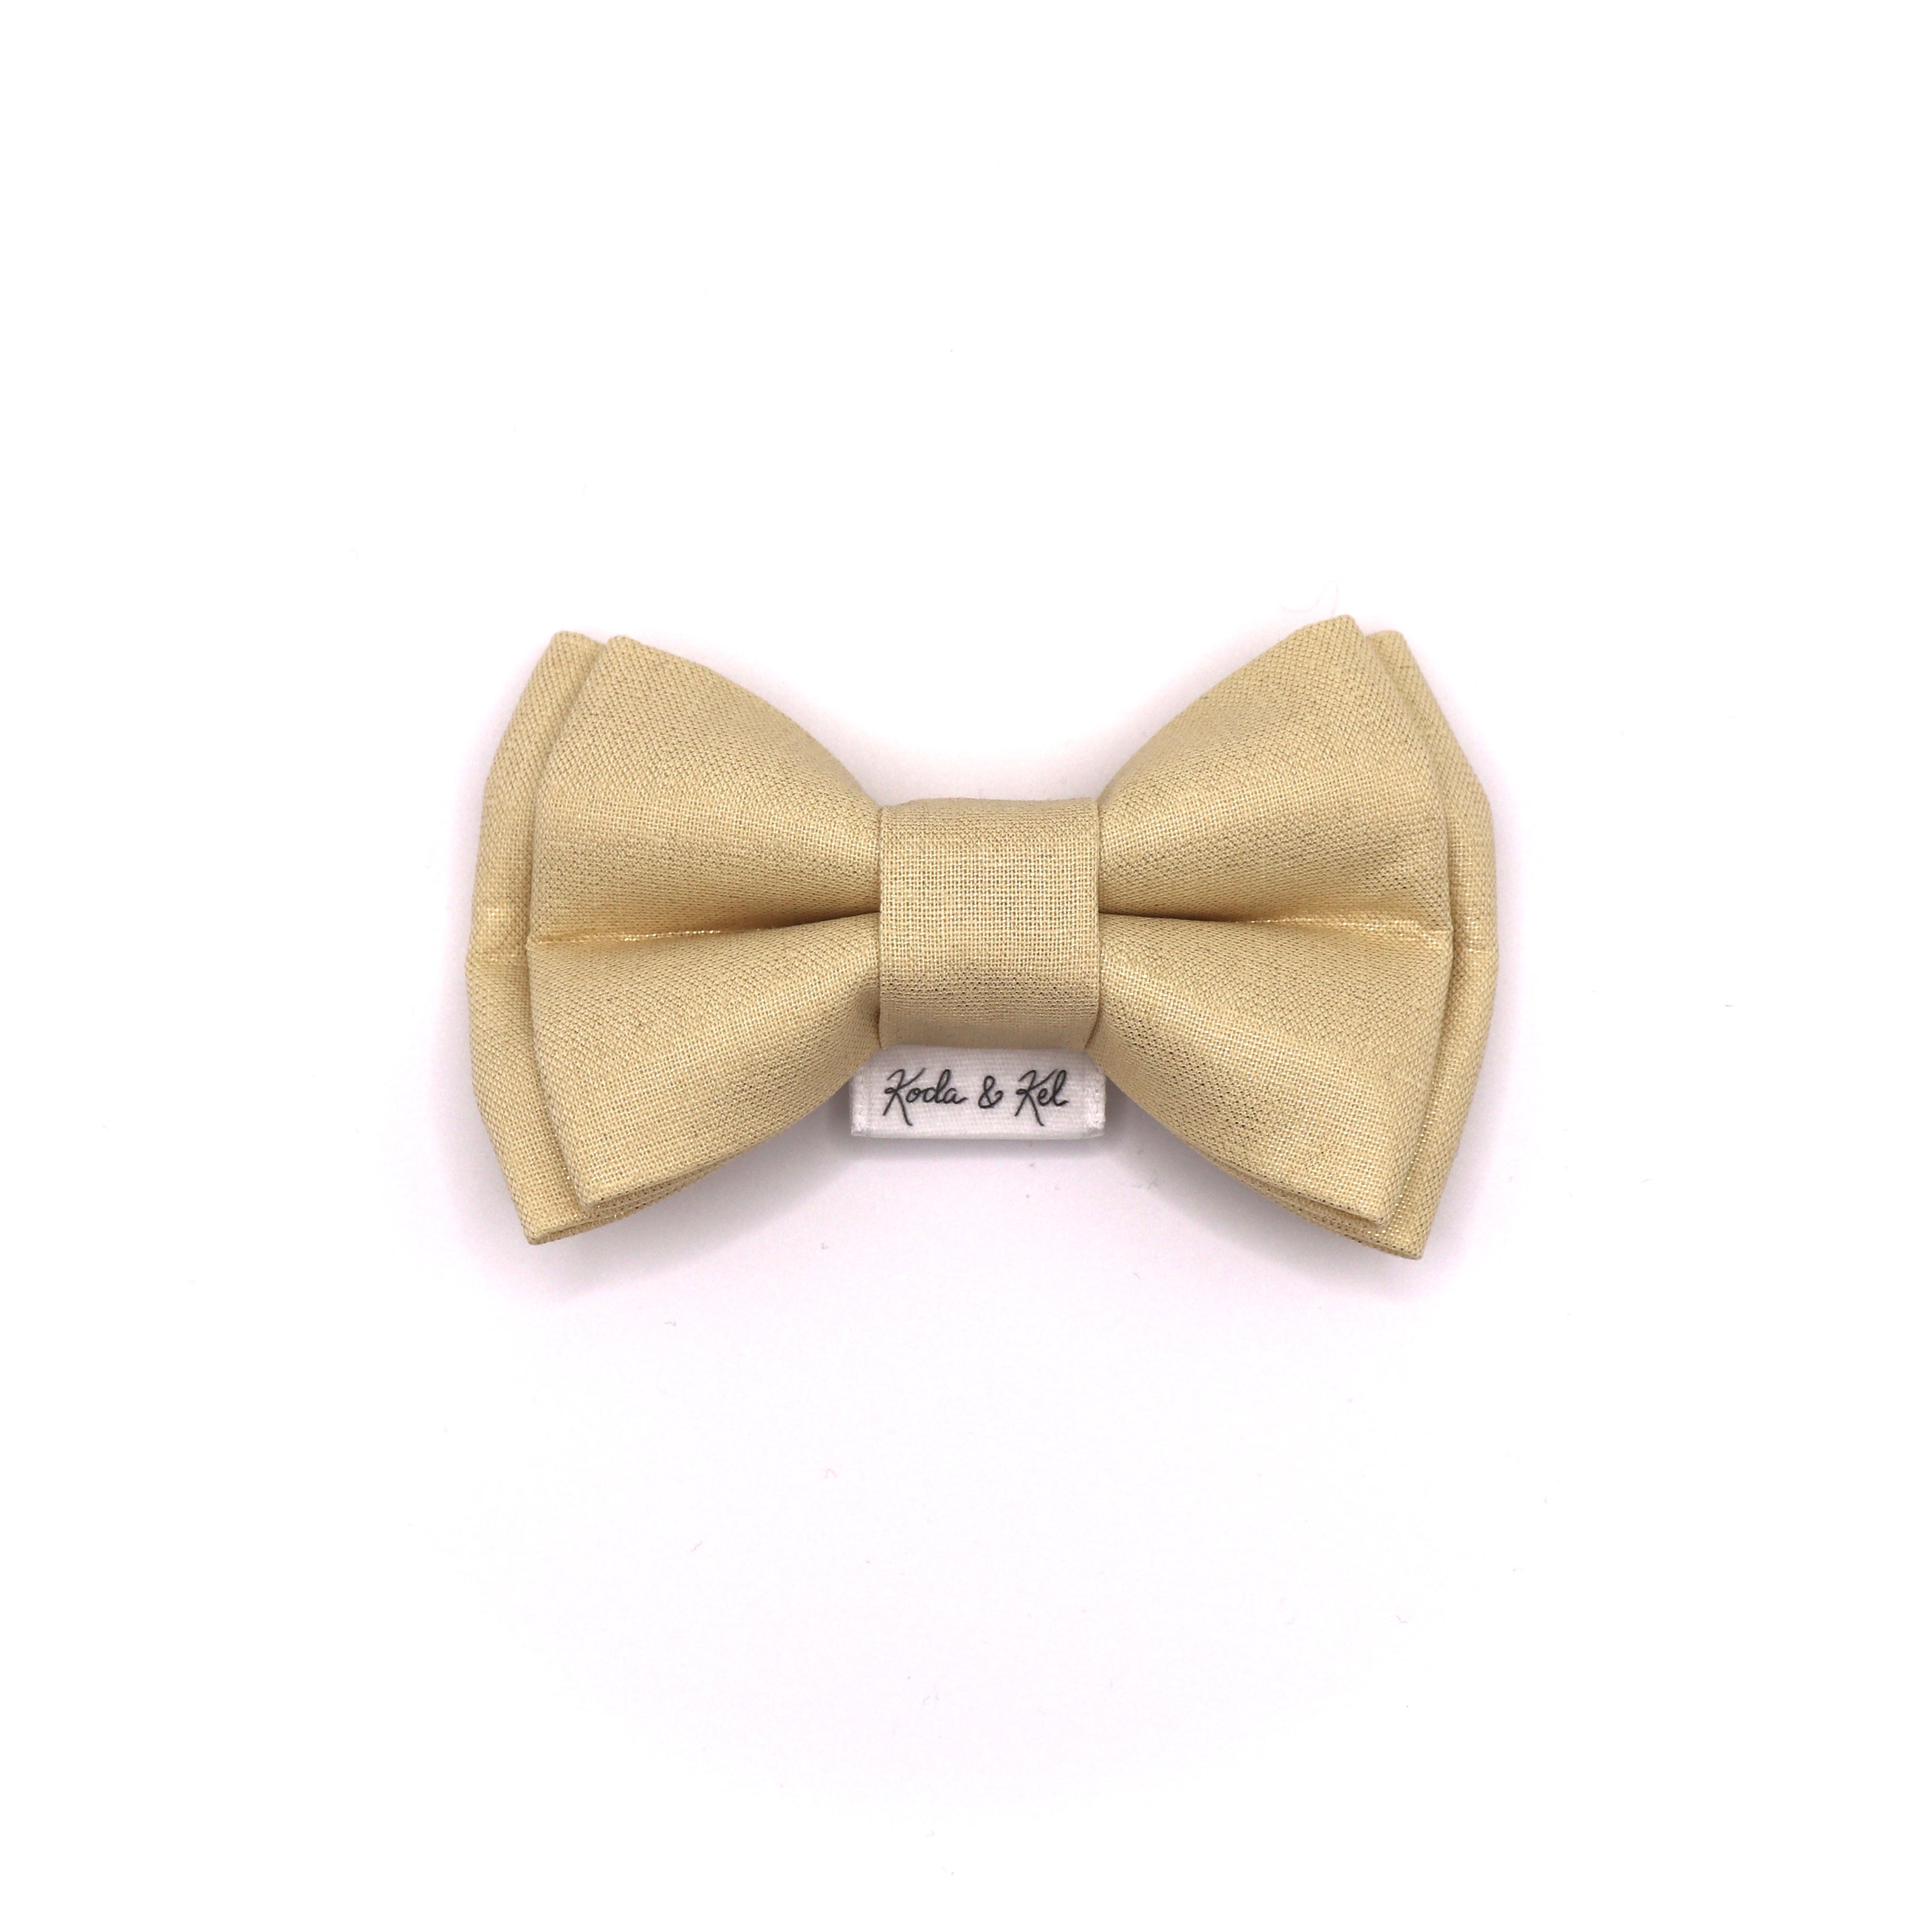 Champagne Shimmer Bow Tie